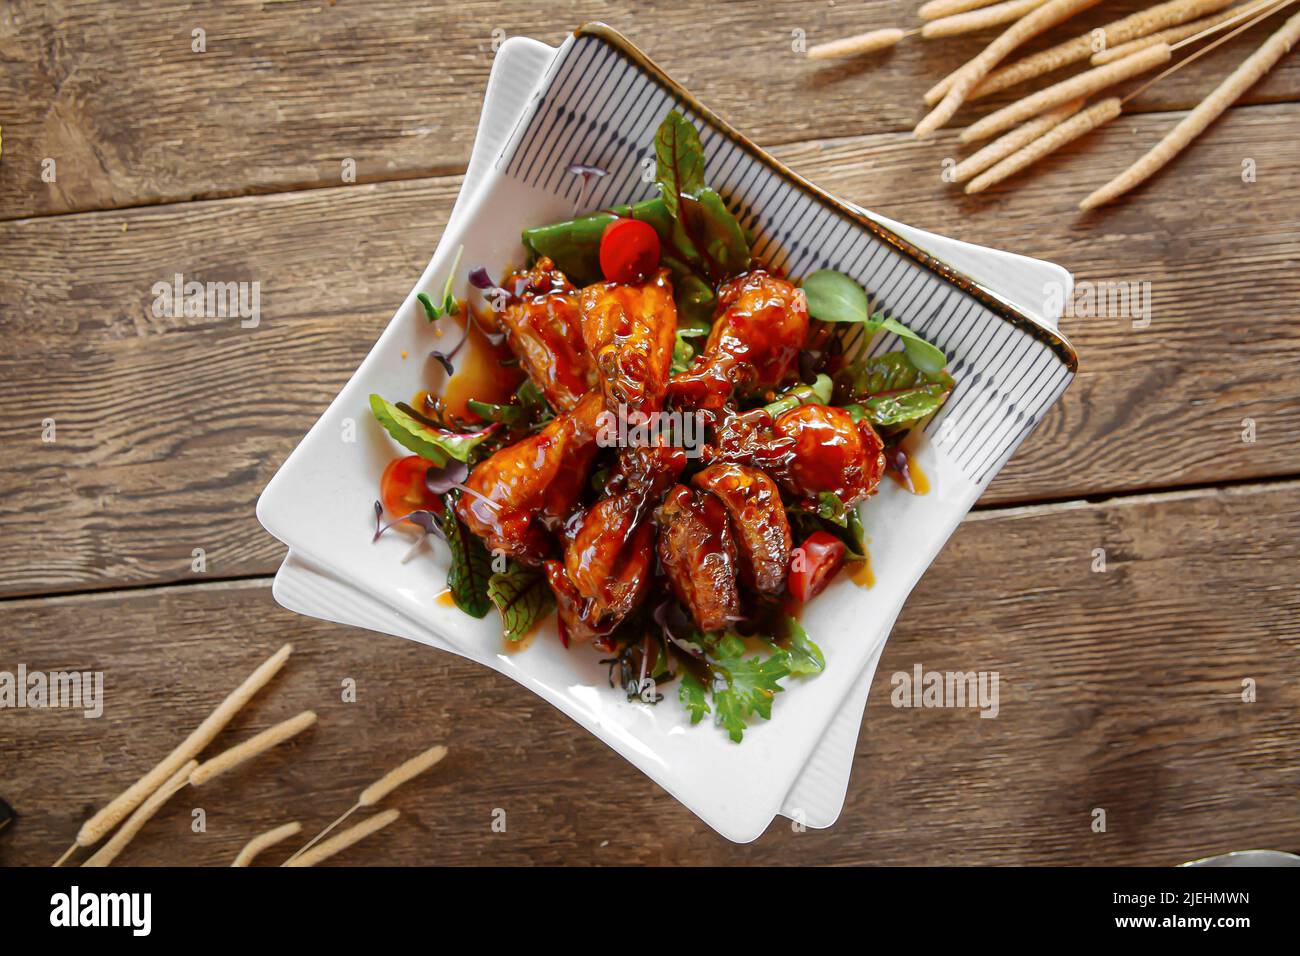 Top view on portion of glazed chicken wings Stock Photo